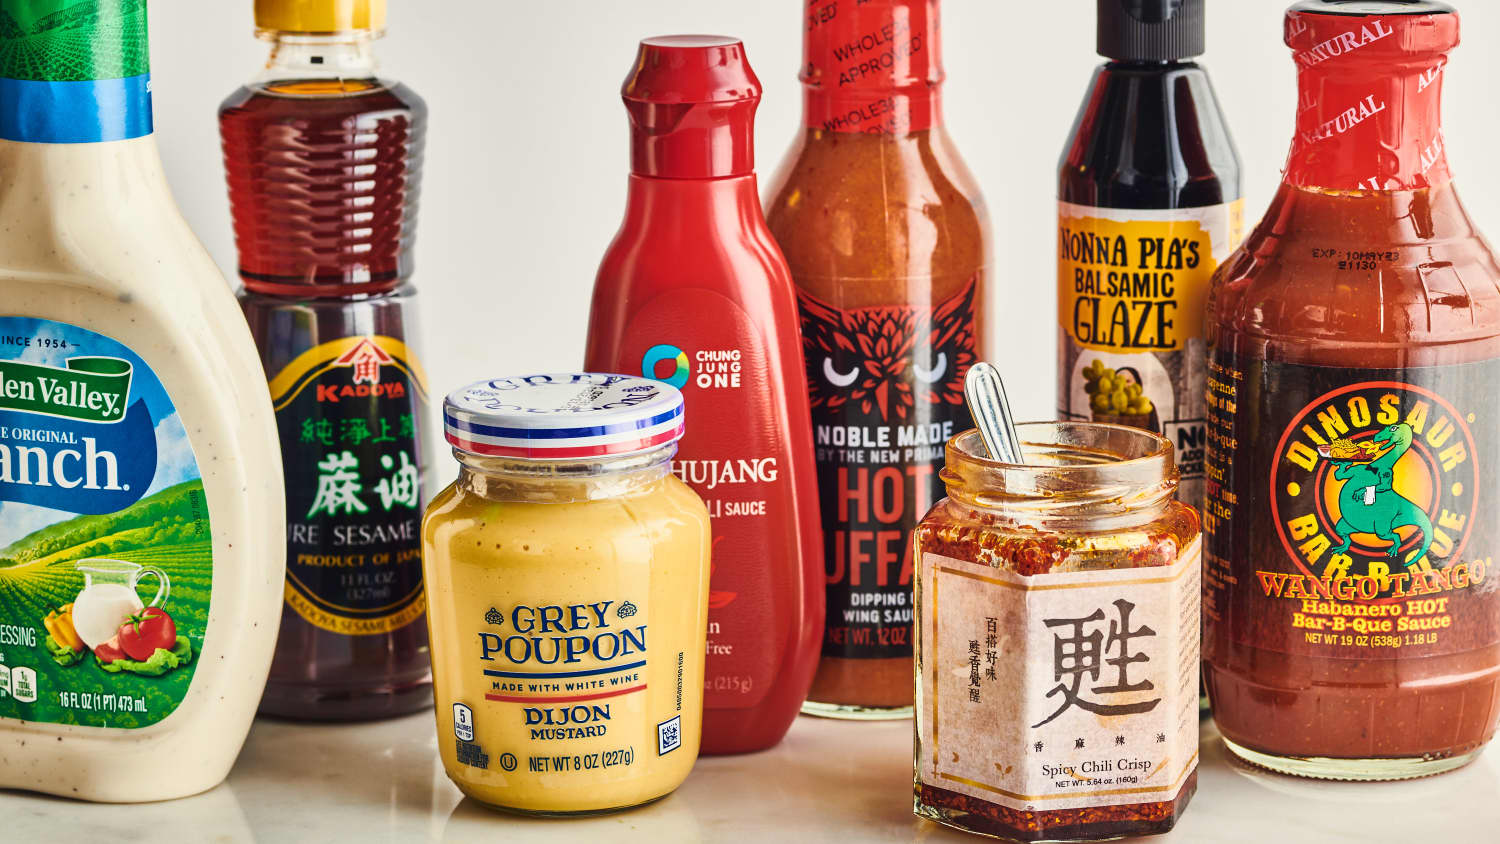 Sauces, Category products